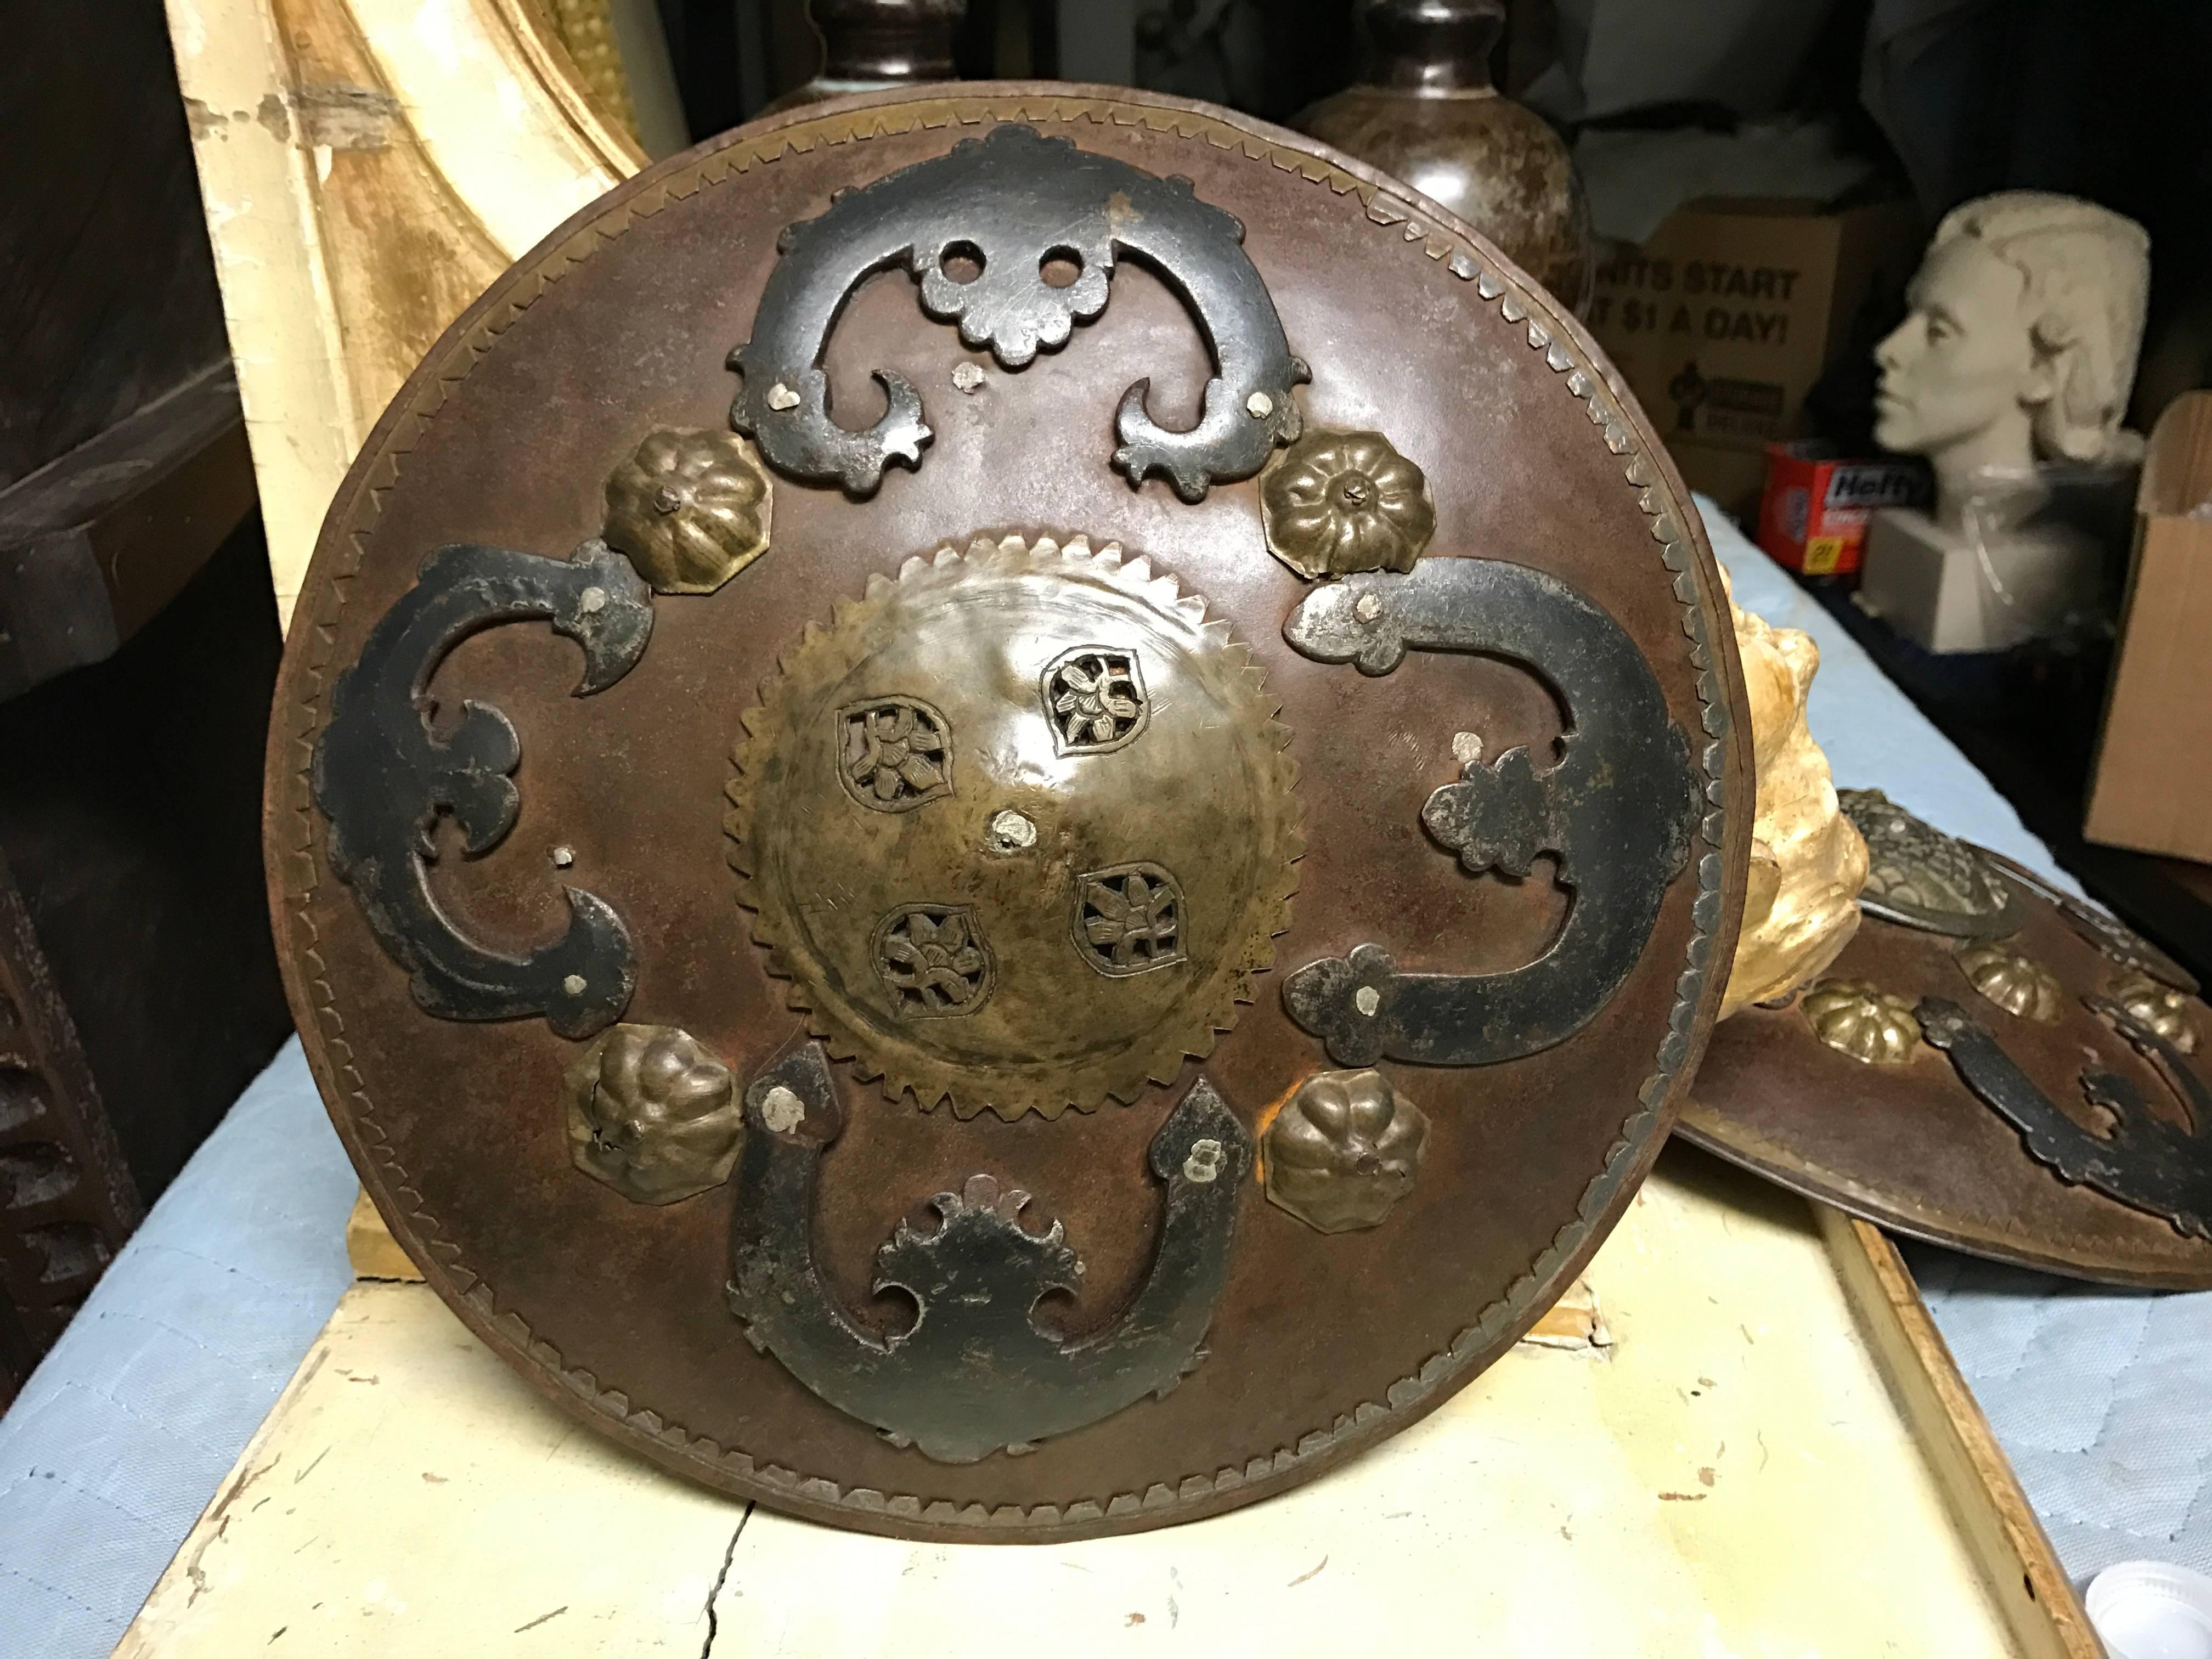 A rare miniature 18th century style ottoman or Moorish iron battle shield with brass trim and blackened and etched iron decorative attachments. The central boss with open cut out decoration. Leather arm straps on the reverse. Unique wall decoration.